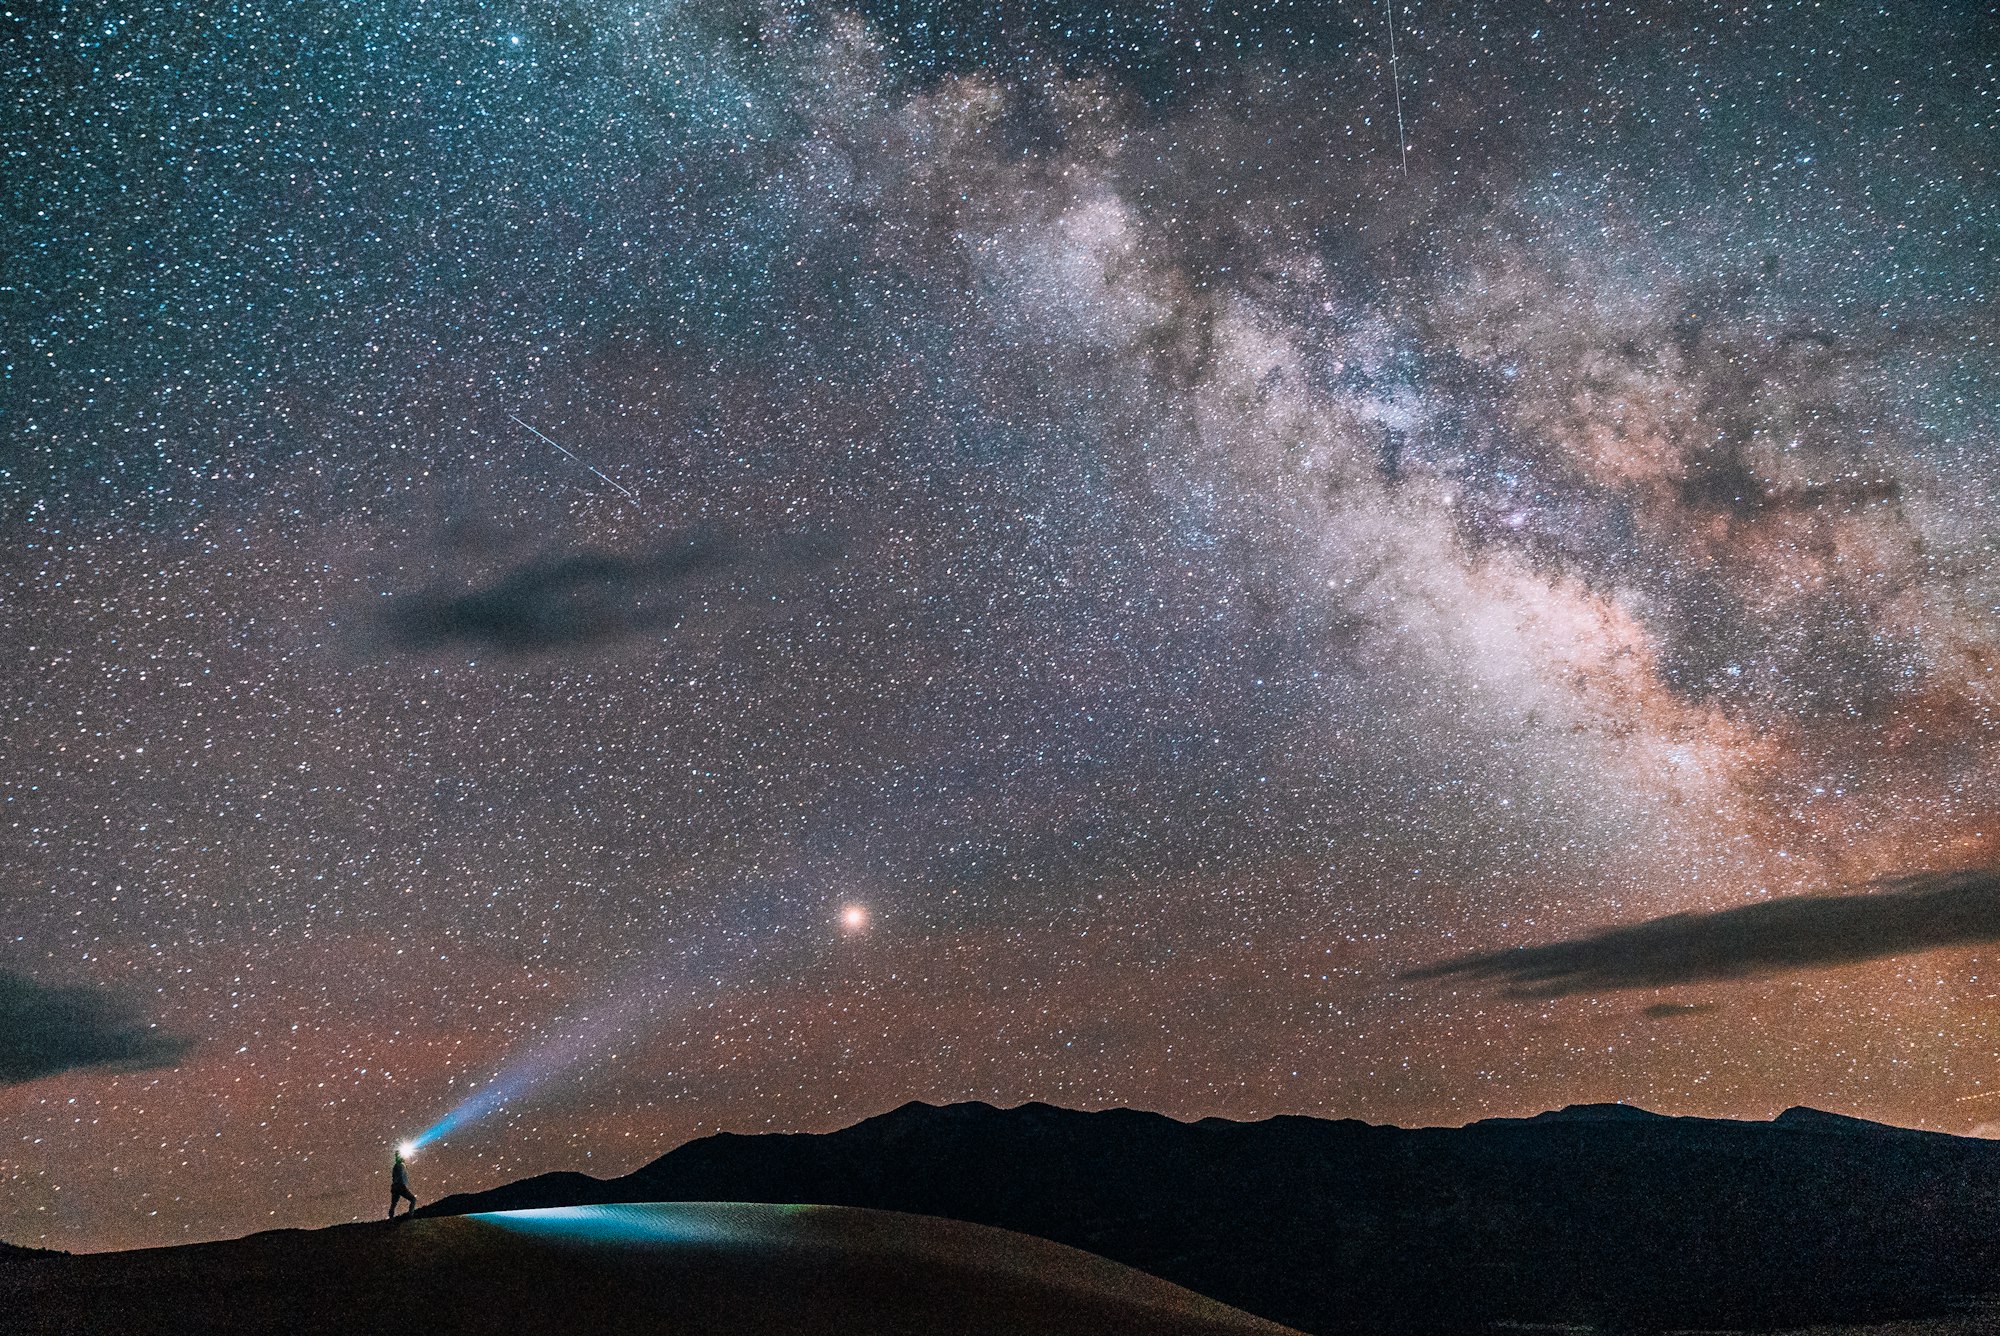 Under the vast night sky, the milky way opened up before us.